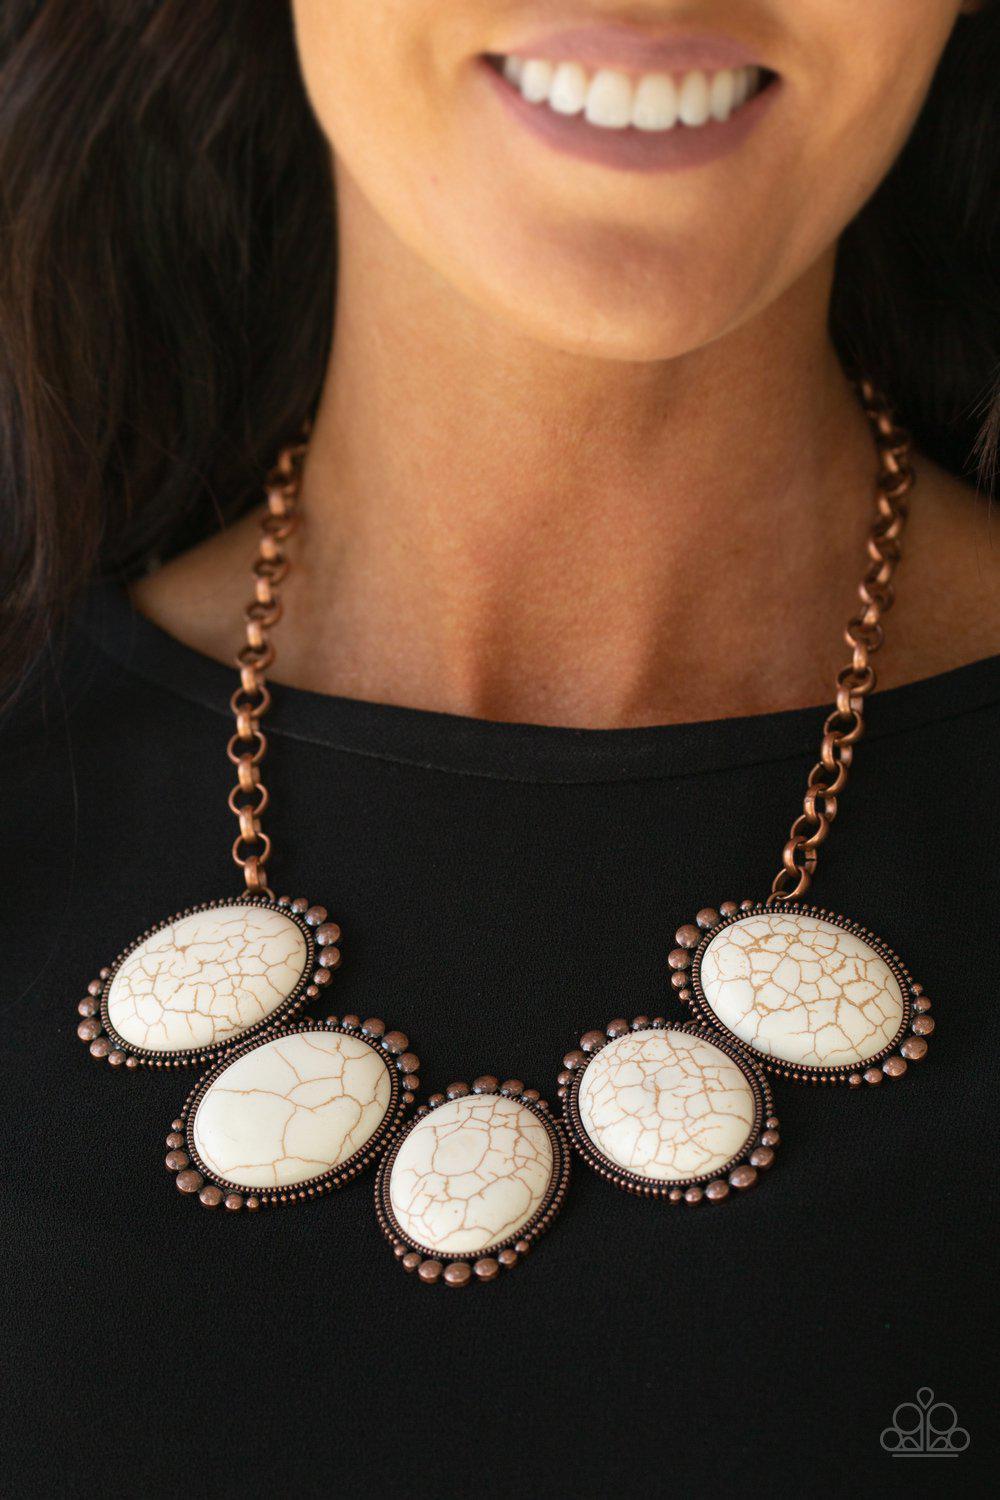 Prairie Goddess Copper and White Stone Necklace - Paparazzi Accessories- lightbox - CarasShop.com - $5 Jewelry by Cara Jewels